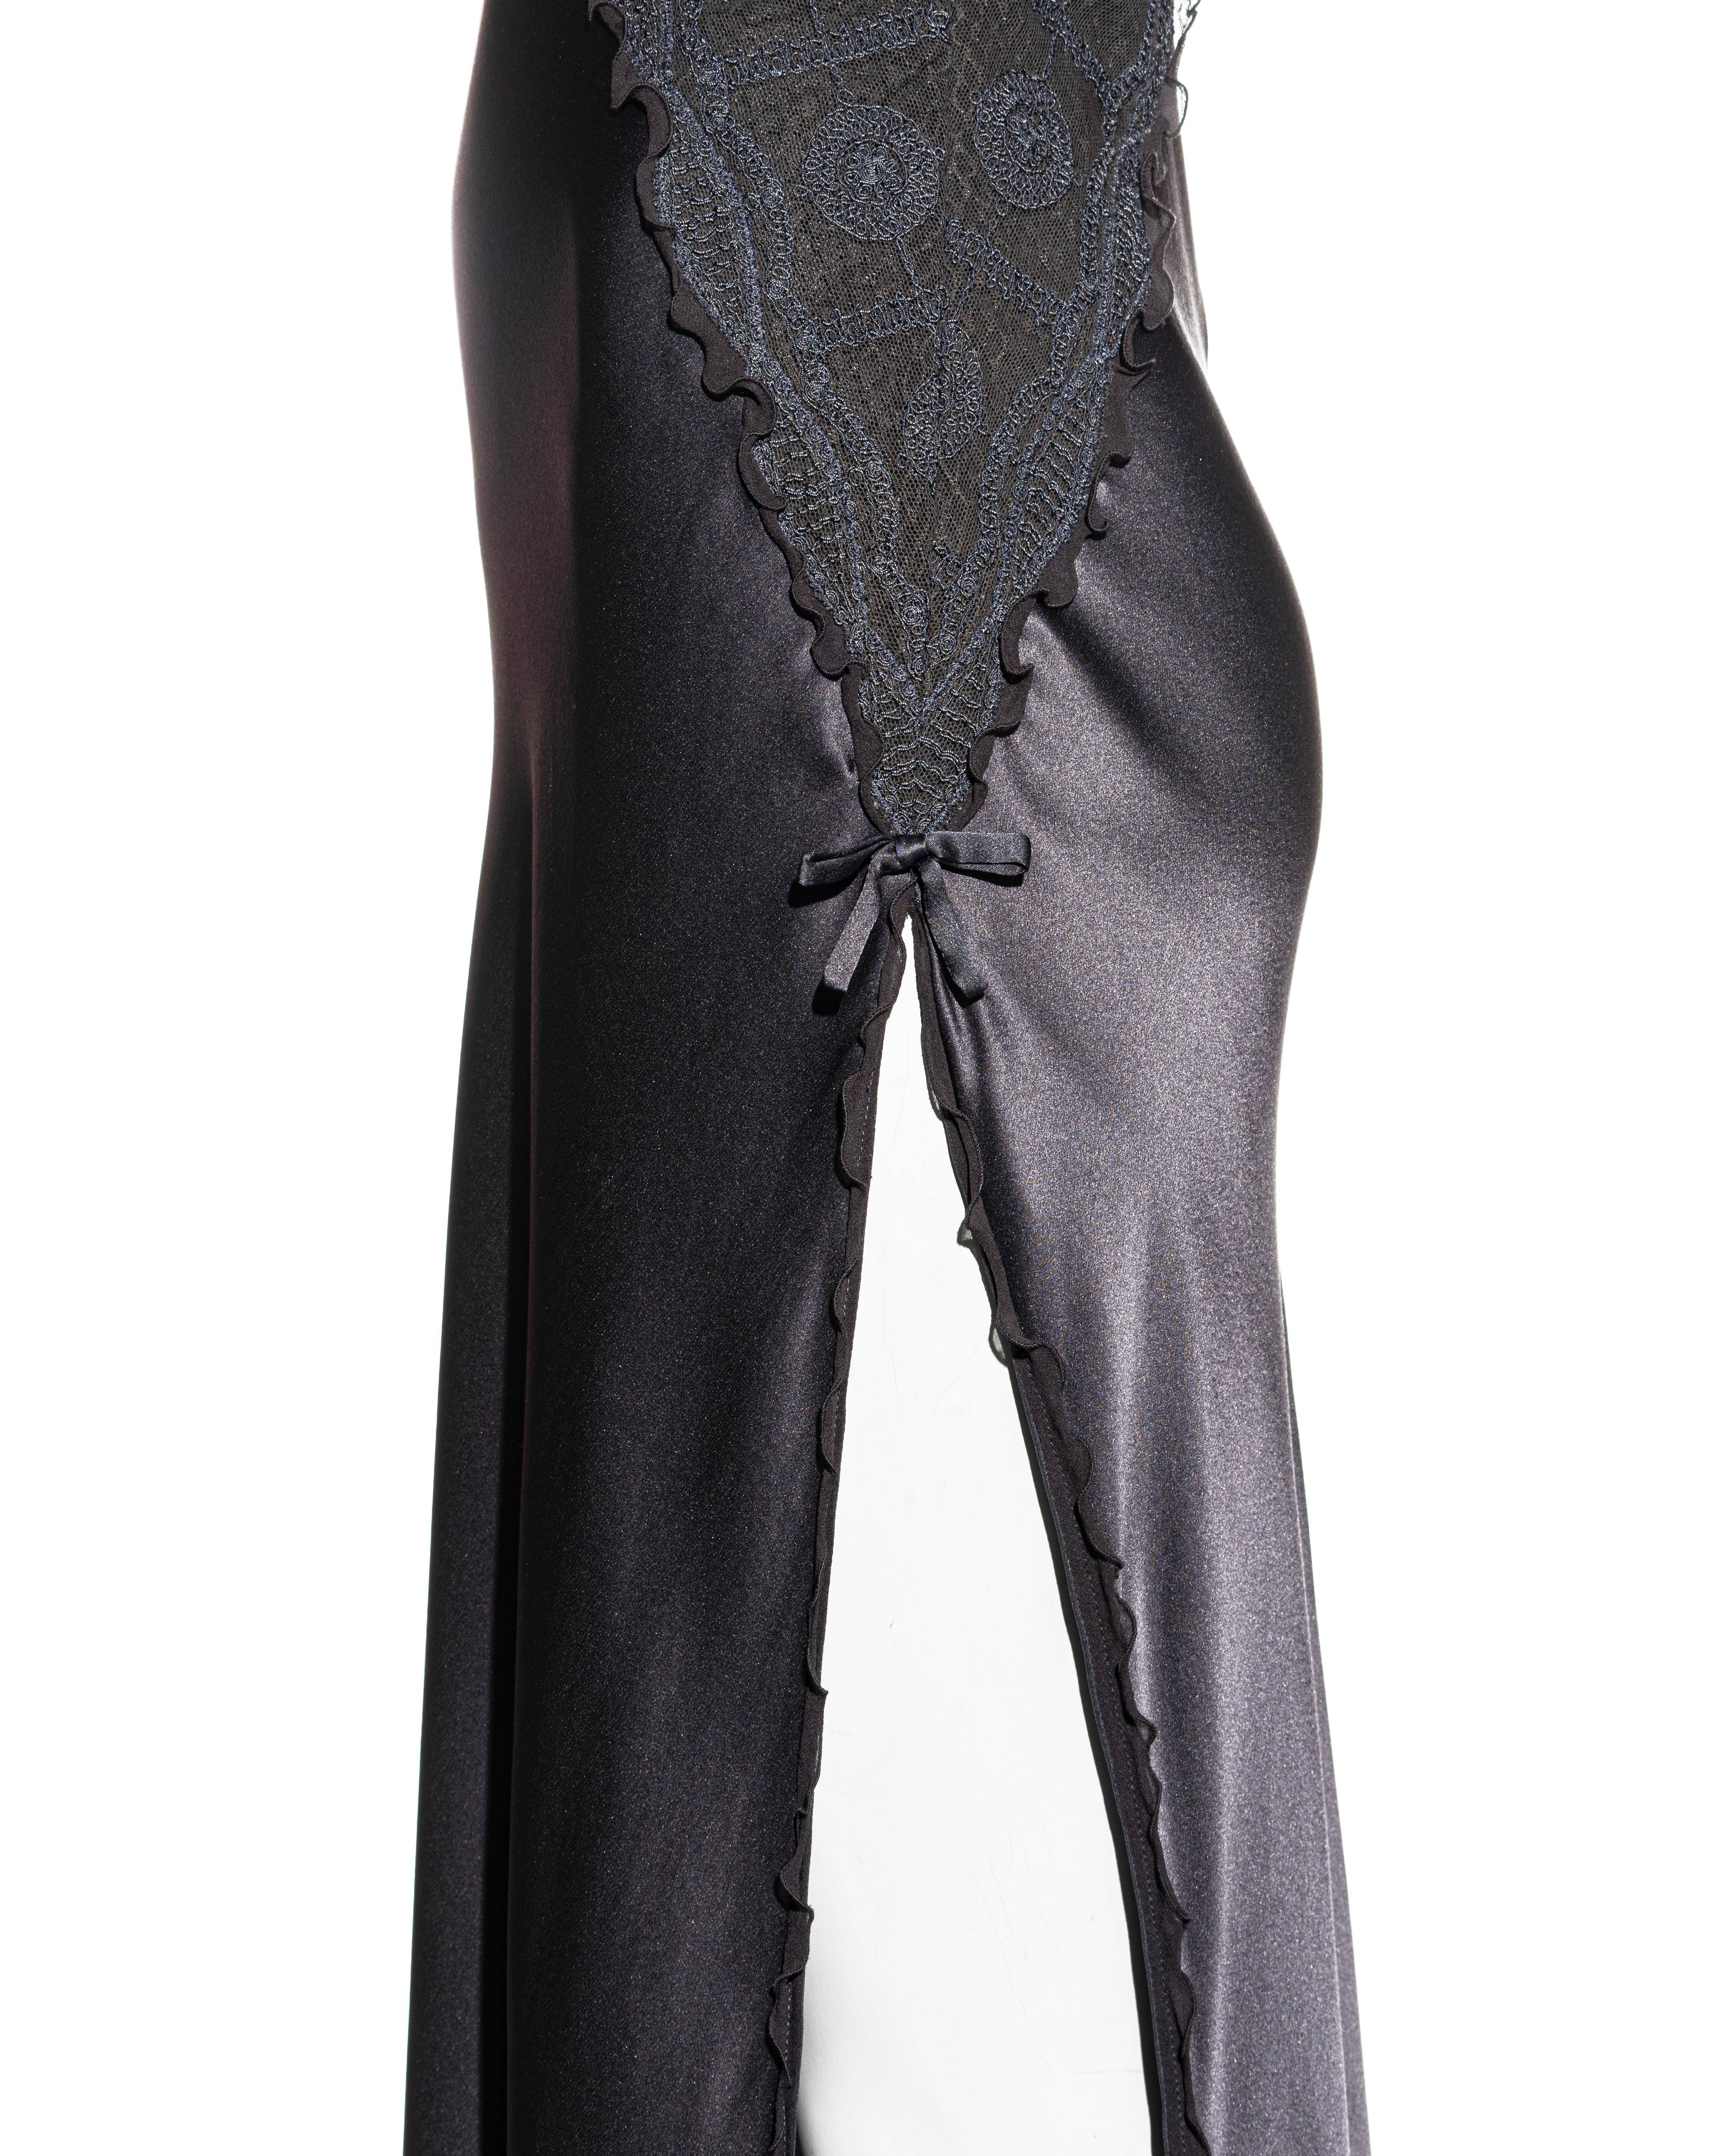 Gianni Versace grey silk and lace evening dress with high leg slit, ss 1997 In Good Condition In London, GB